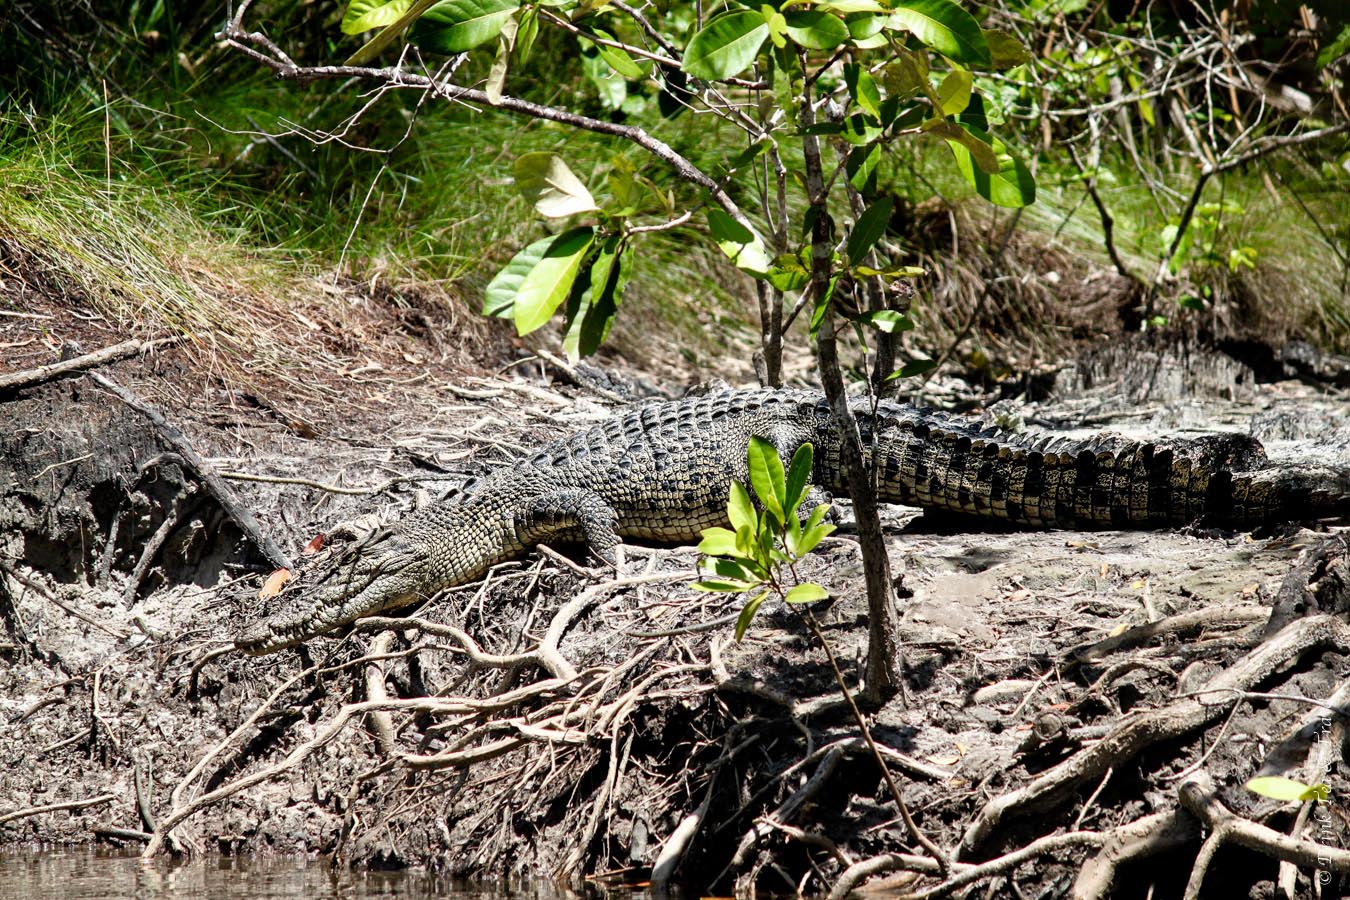 Salt water crocodile resting on the banks of the Daintree River